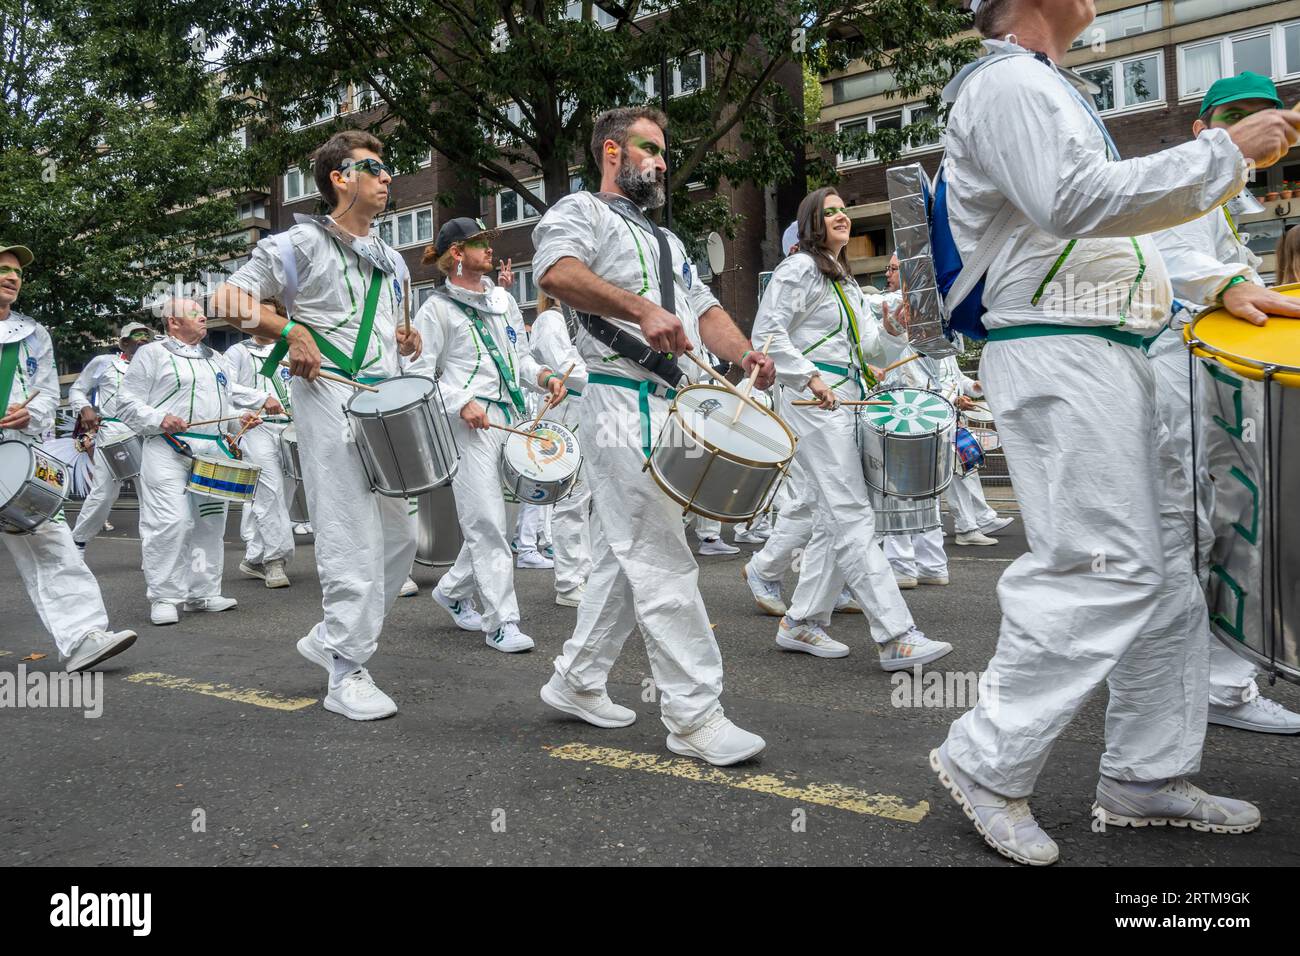 NOTTING HILL, LONDON, ENGLAND - 28 August 2023: A band performing at Notting Hill Carnival 2023 Stock Photo